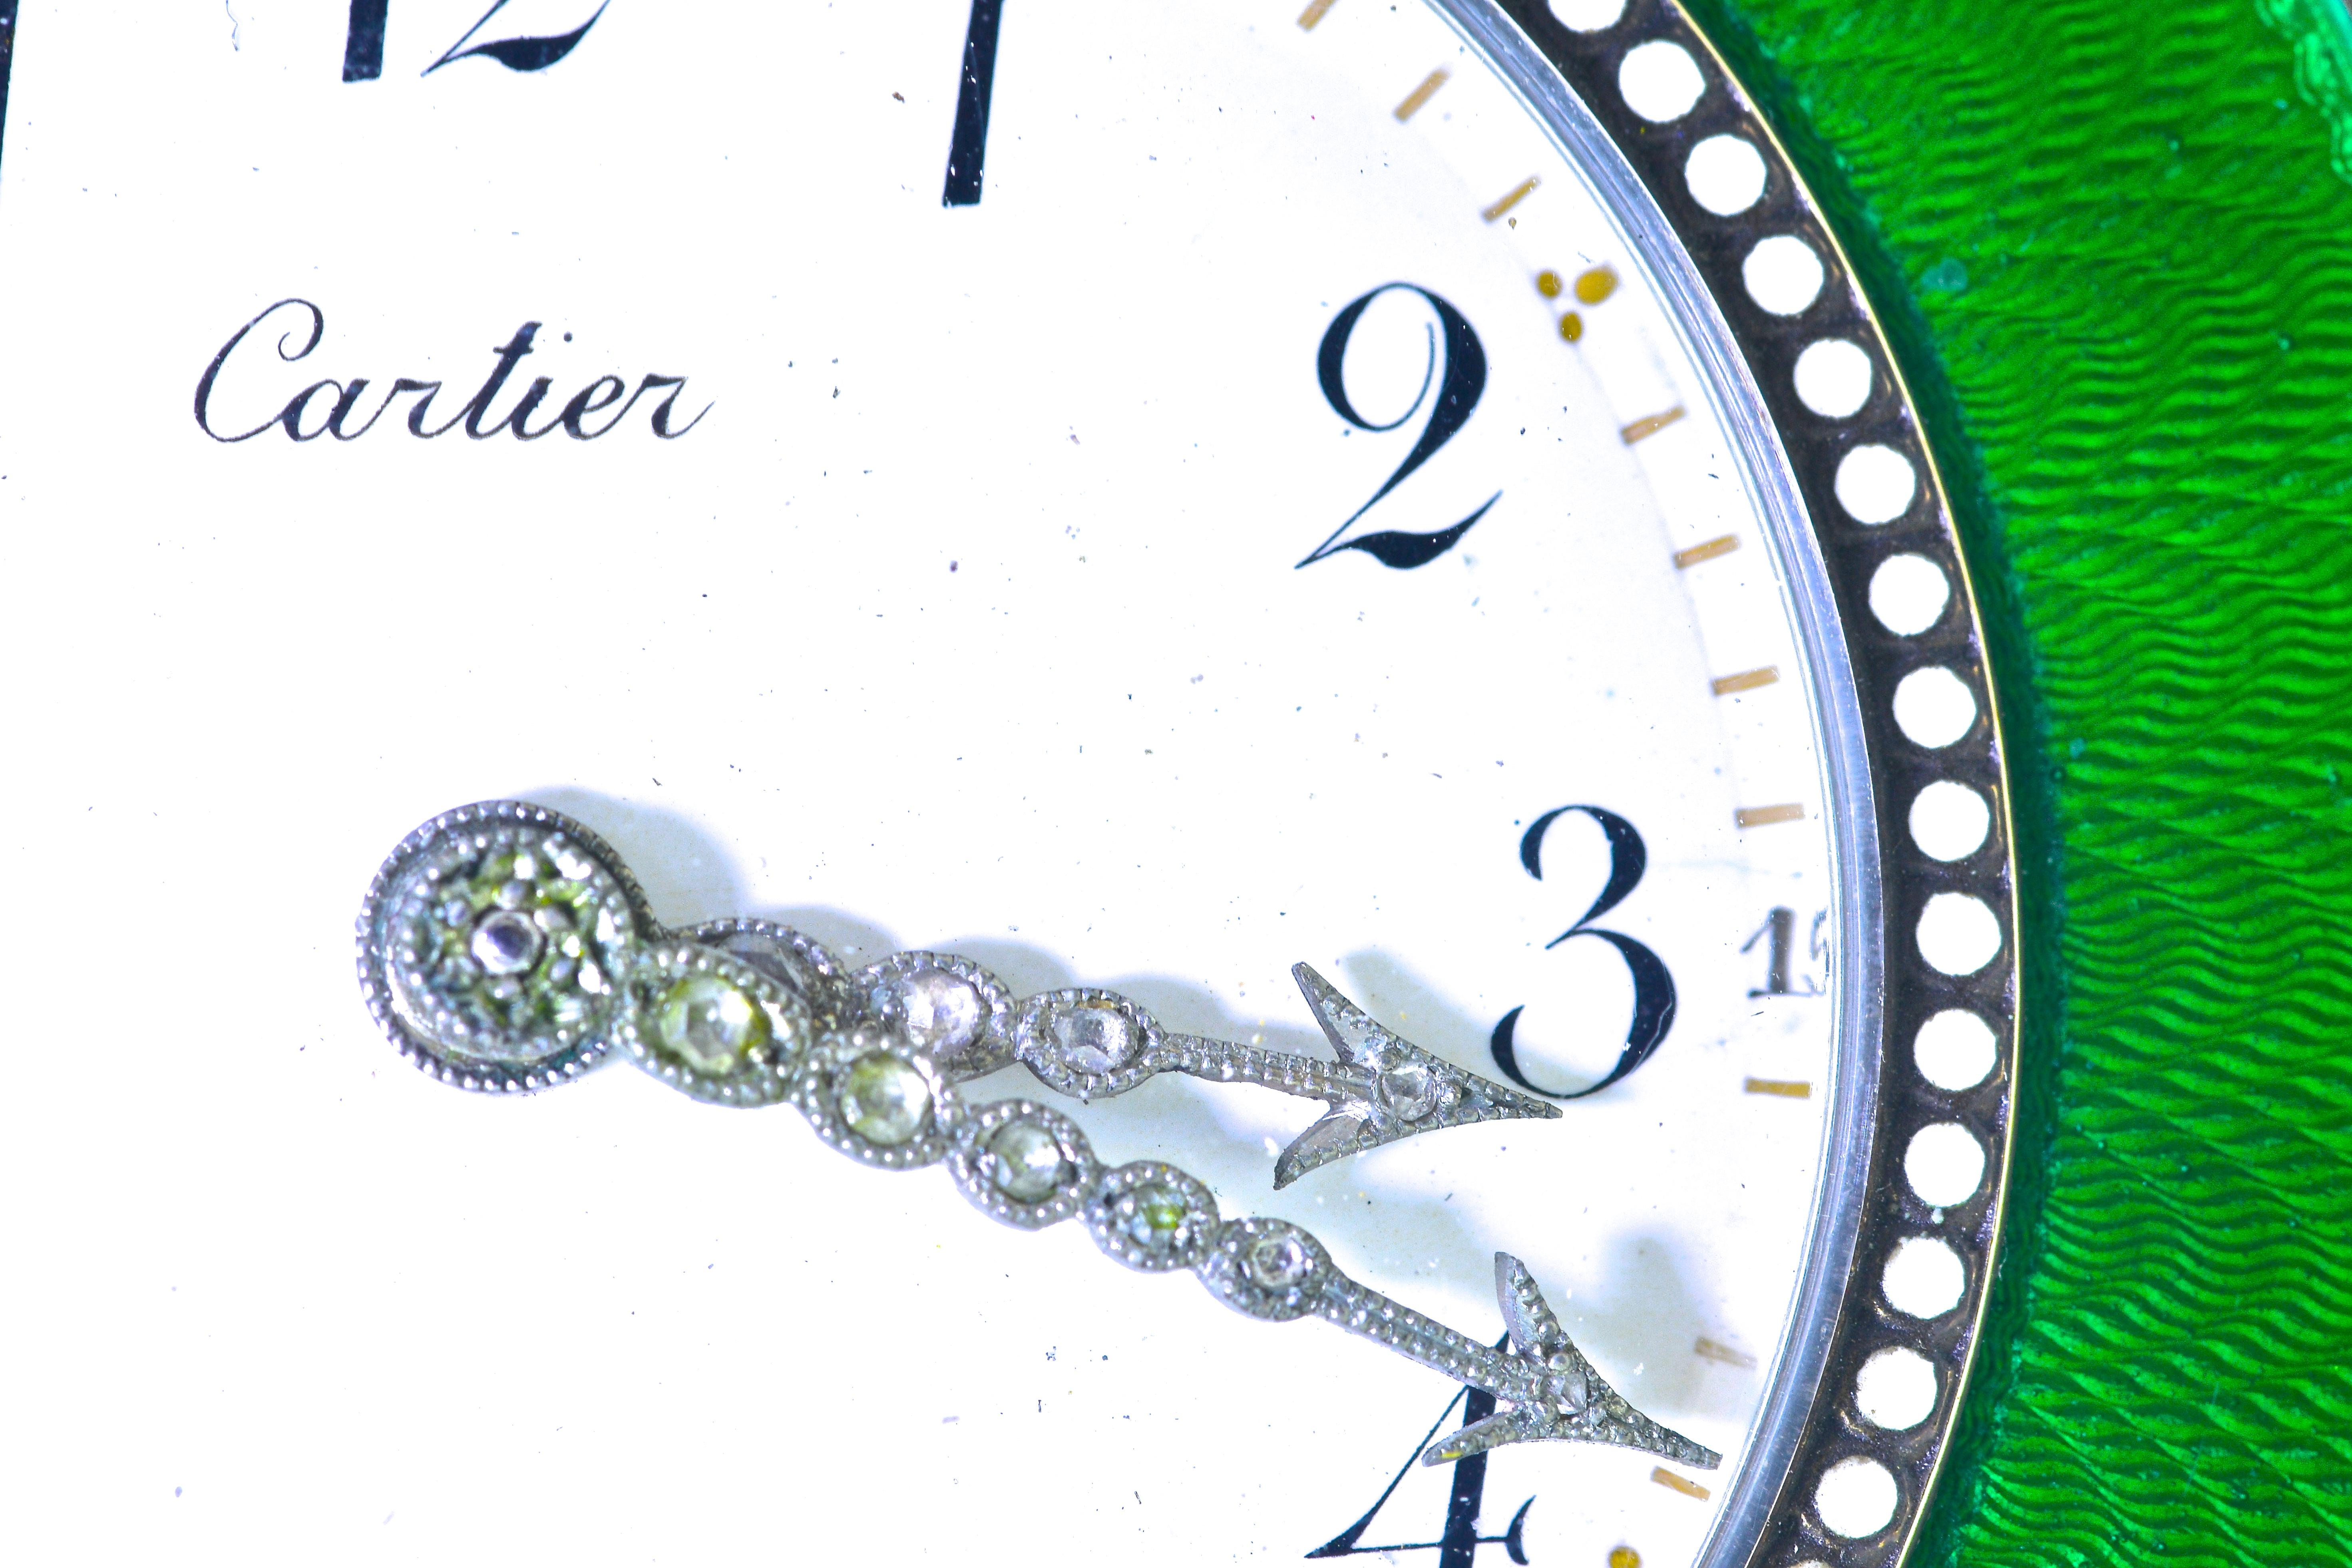 Cartier desk clock, Belle Epoque, circa 1914.   Green guilloche enamel, white opaque enamel and white enamel to simulate pearls around the dial.  Rose cut diamonds are set into the silver hands and in silver floral motifs.  This silver small clock,